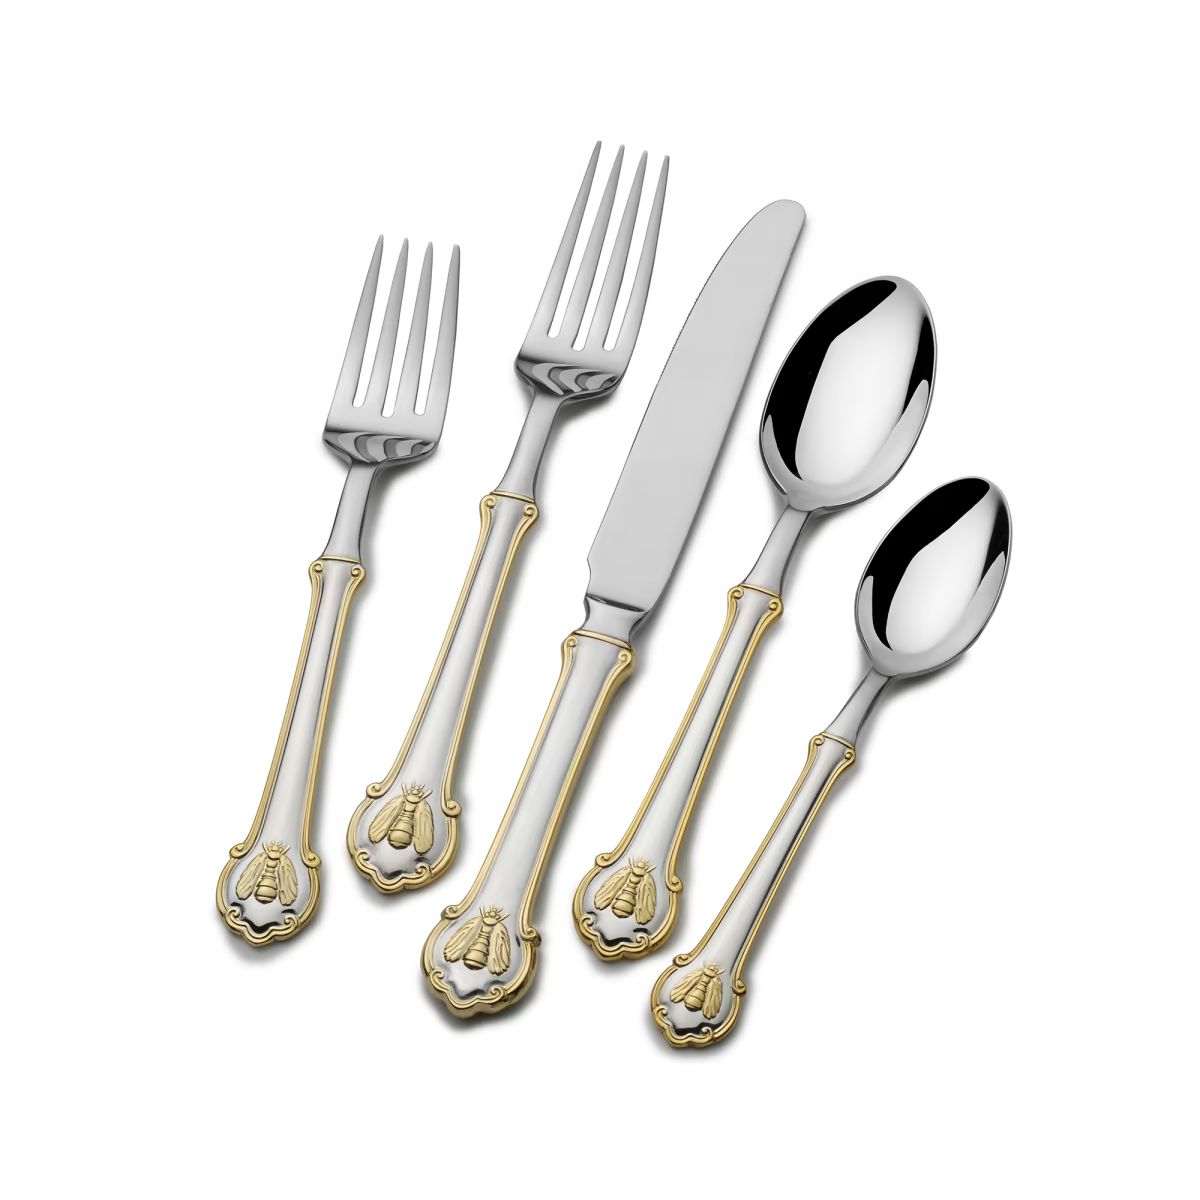 Wallace "Napoleon Bee" Gold-Accented 45-pc. Service for 8 Flatware Set | Ross-Simons